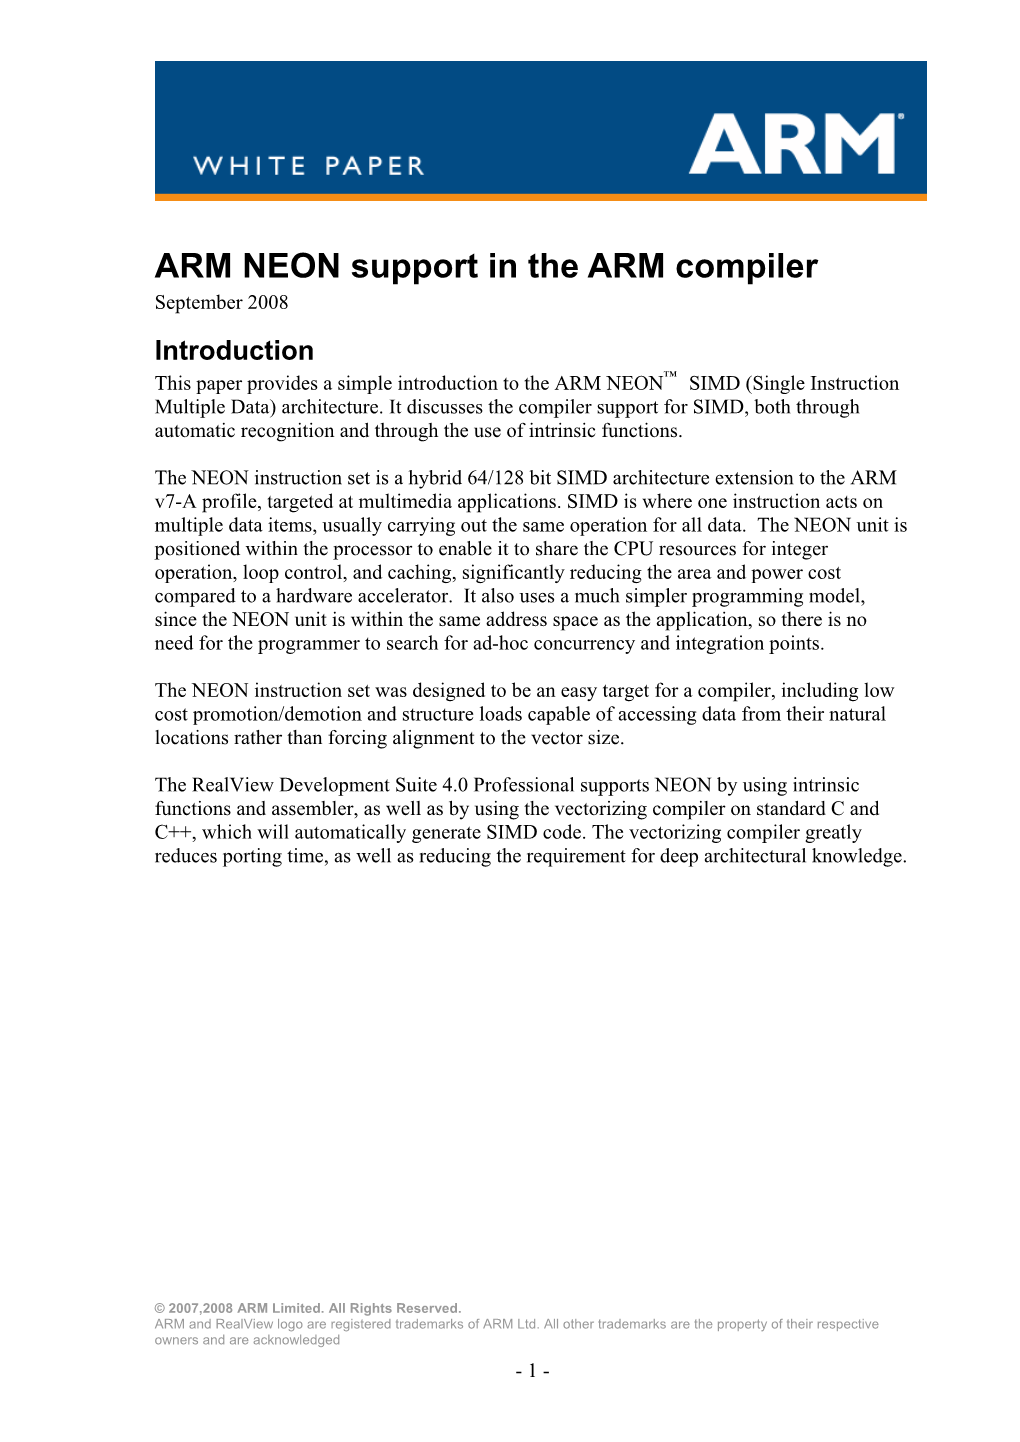 NEON Support in the ARM Compiler